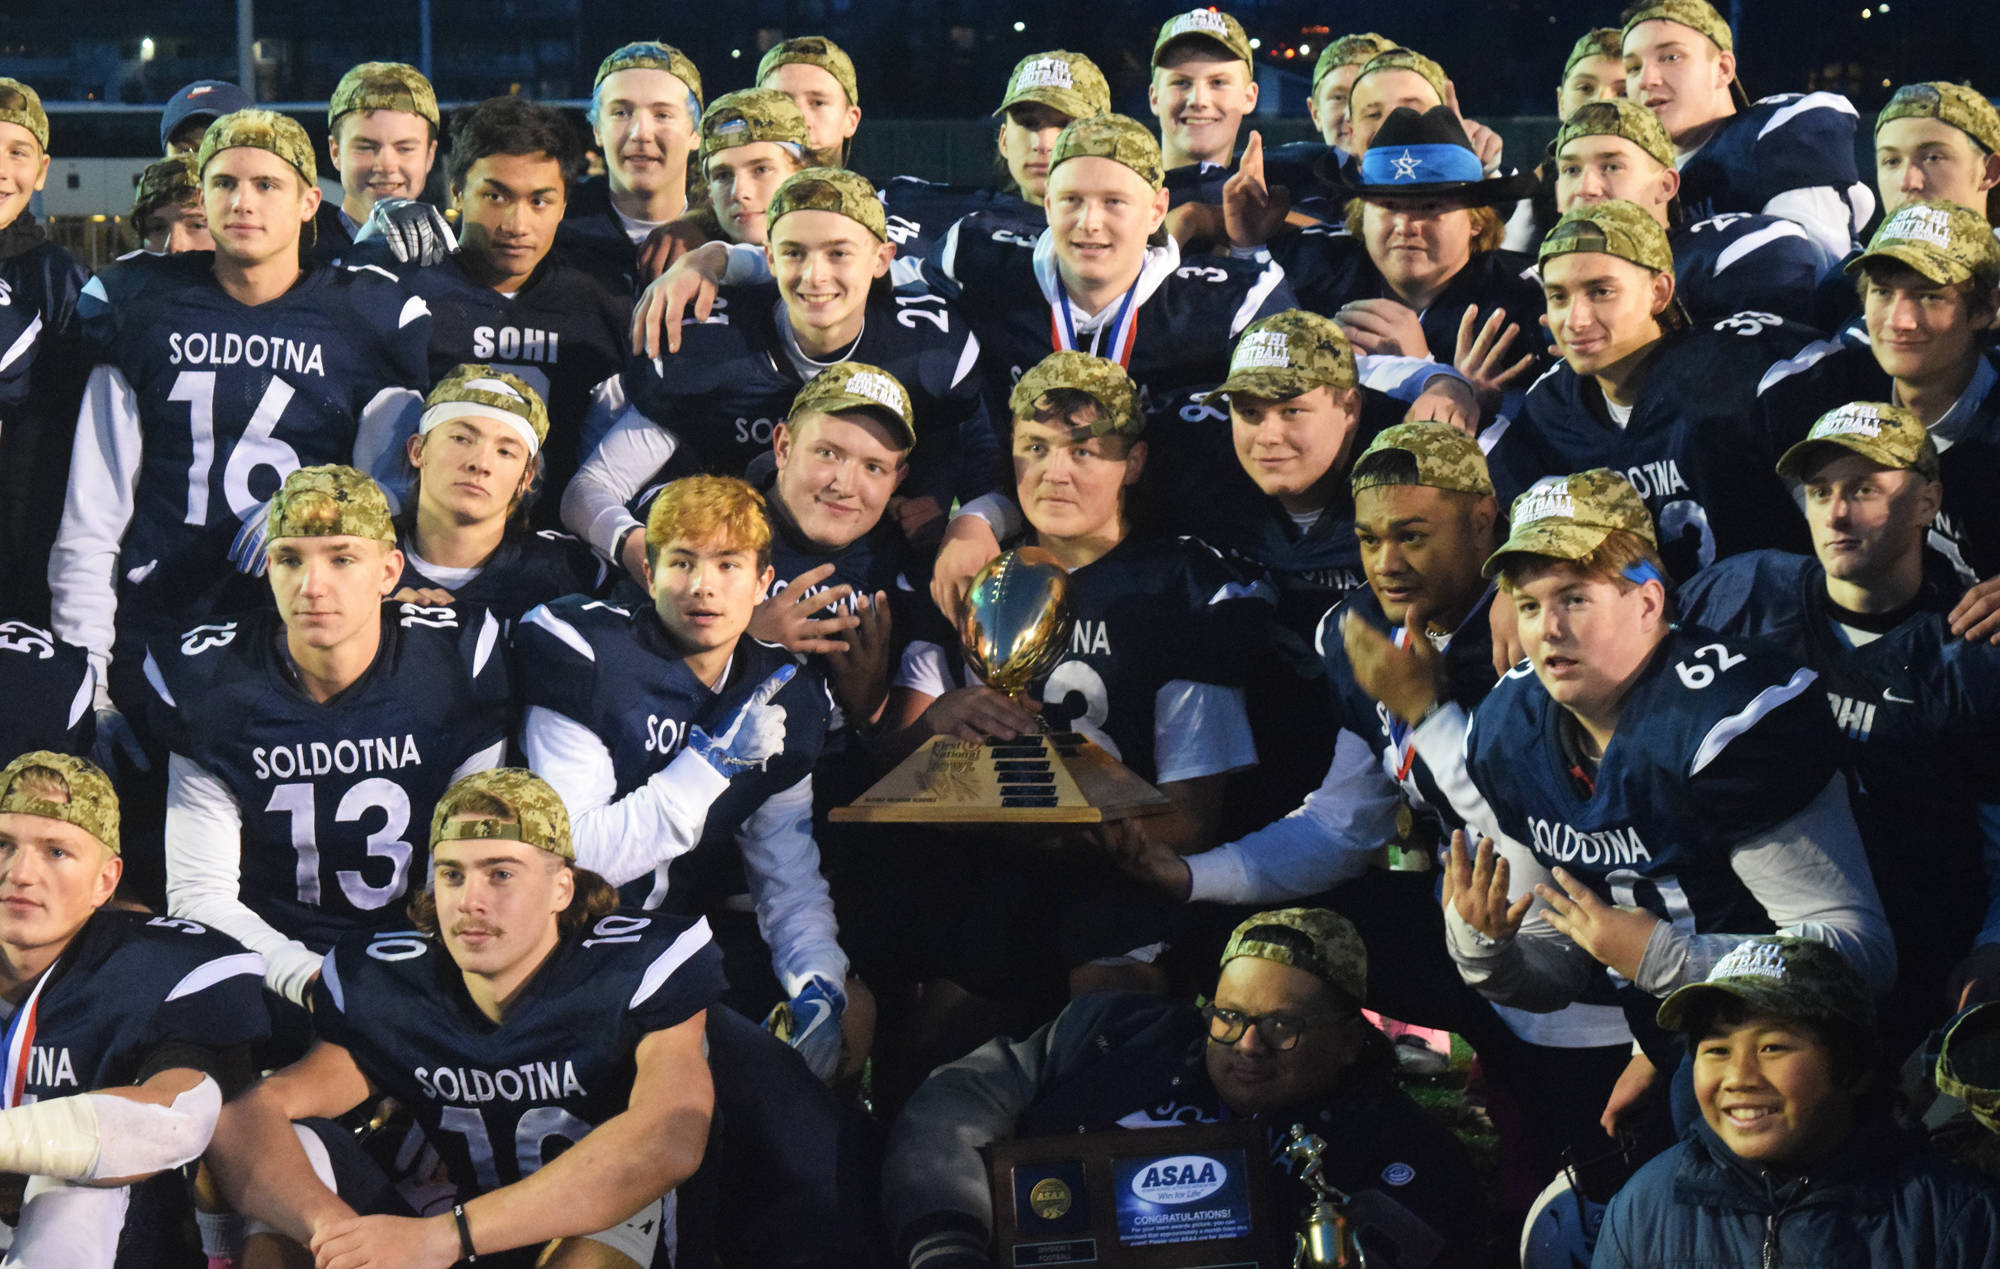 Members of the Soldotna football team pose with the trophy Oct. 19 at the Division II state football championship at Anchorage Football Stadium in Anchorage. Soldotna defeated Lathrop 69-13. (Photo by Joey Klecka/Peninsula Clarion)